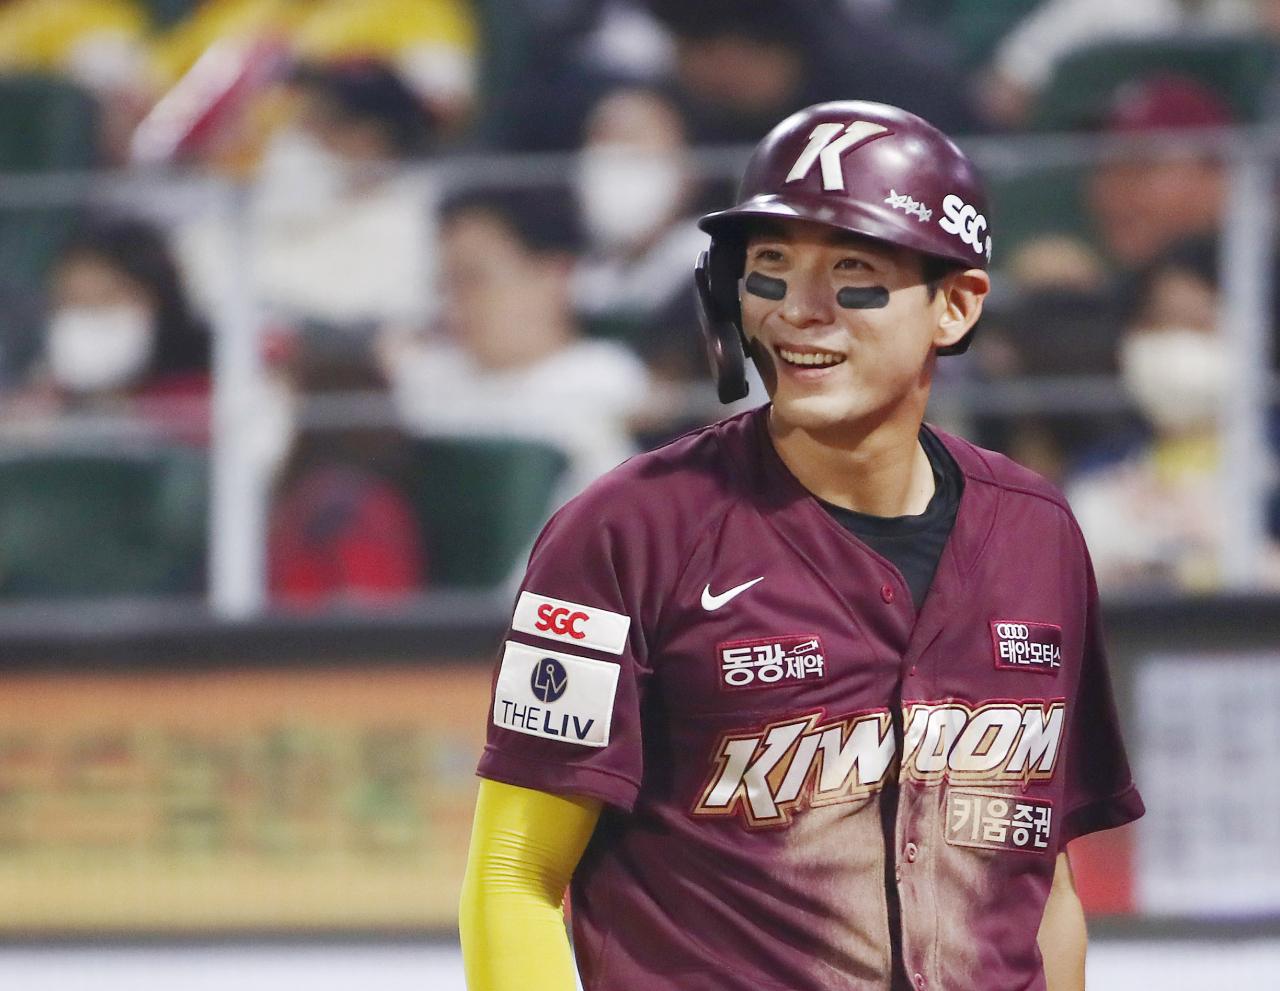 In this file photo from Sept. 30, Lee Jung-hoo of the Kiwoom Heroes smiles after scoring a run against the SSG Landers during the top of the 10th inning of a Korea Baseball Organization regular season game at Incheon SSG Landers Field in Incheon, some 30 kilometers west of Seoul. (Yonhap)